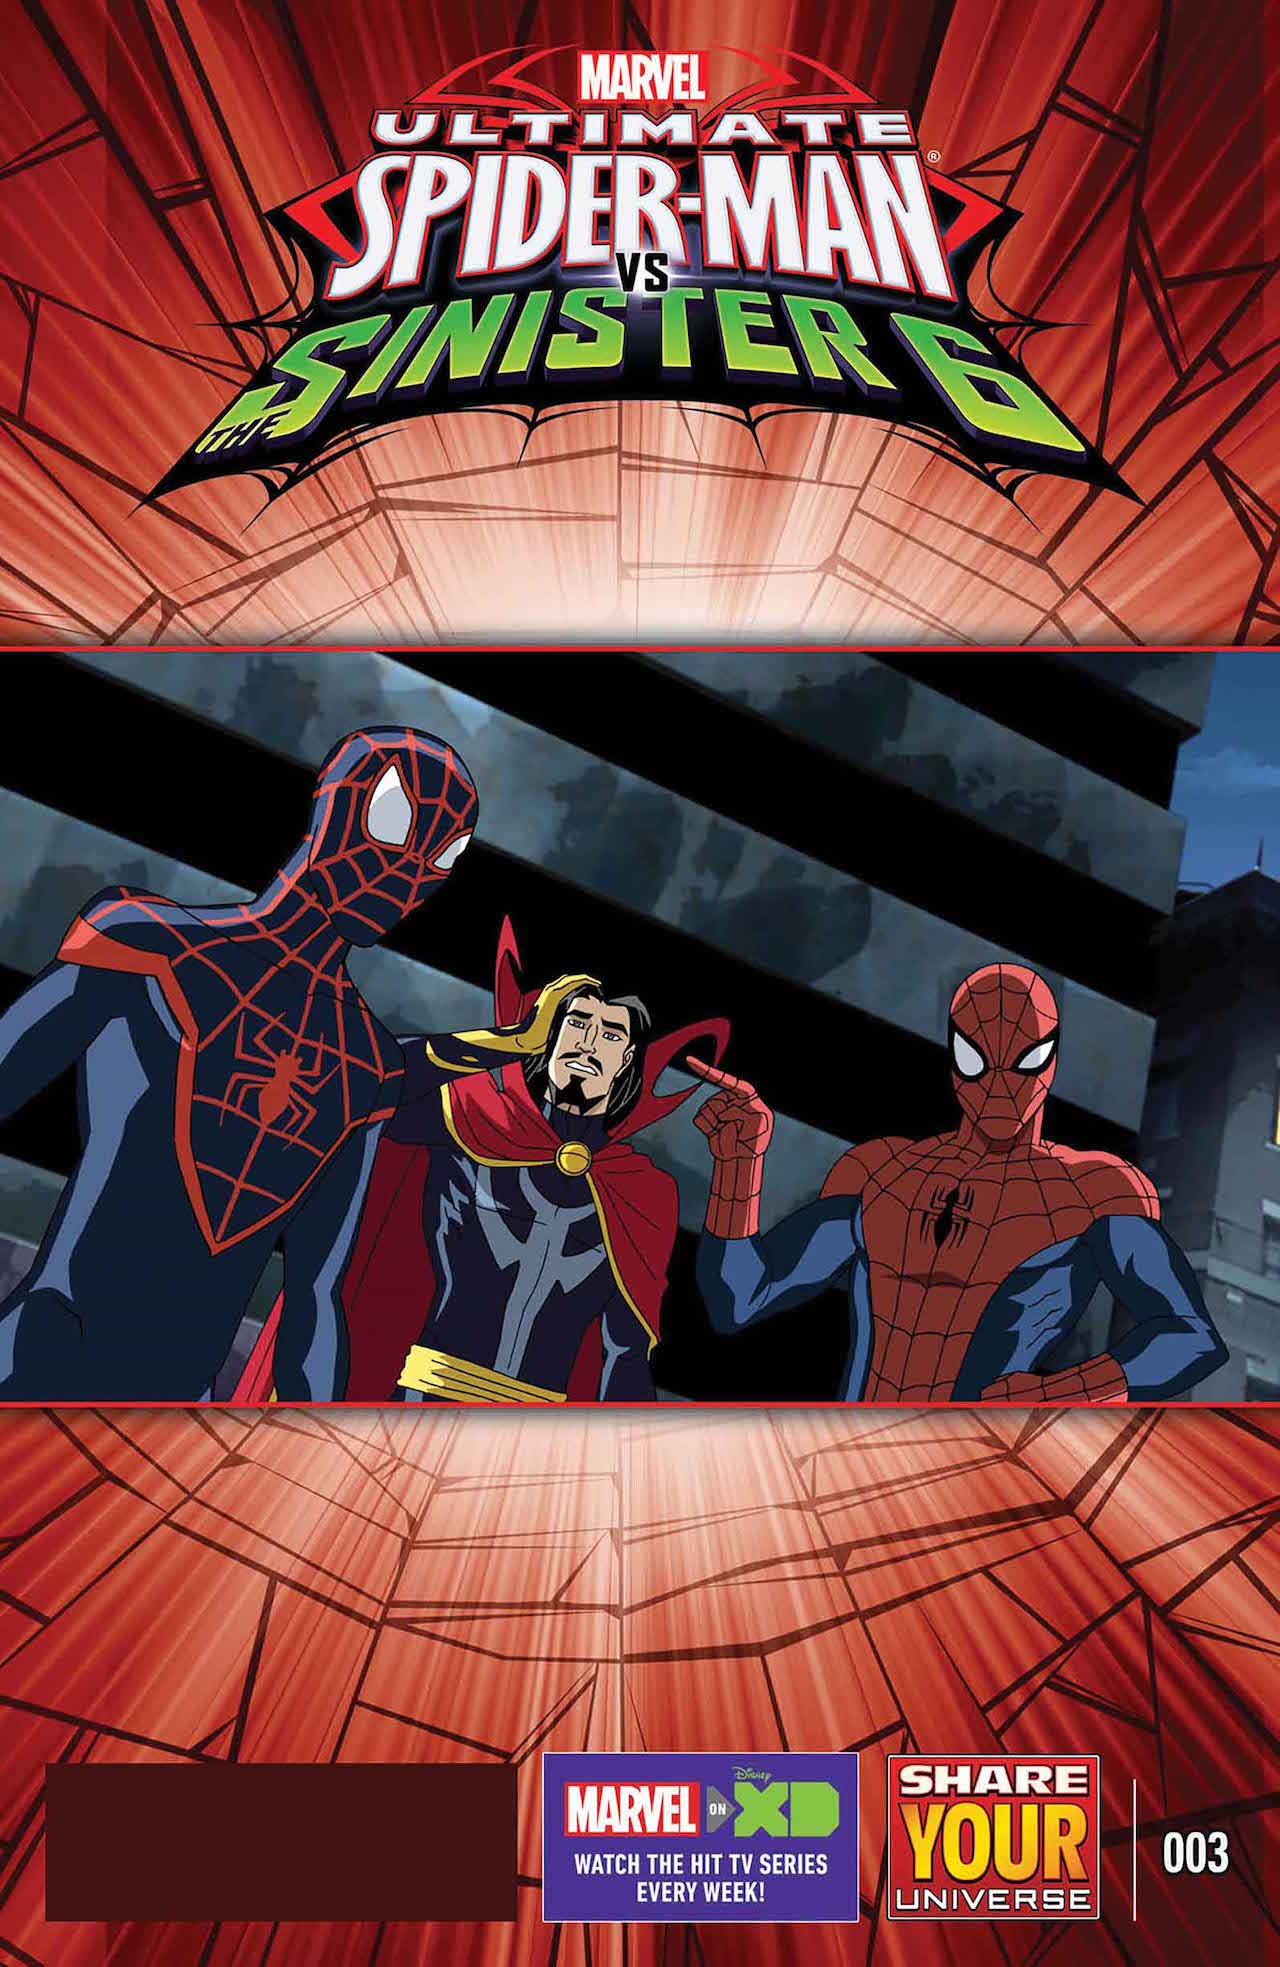 MARVEL UNIVERSE ULTIMATE SPIDER-MAN VS. THE SINISTER SIX #3